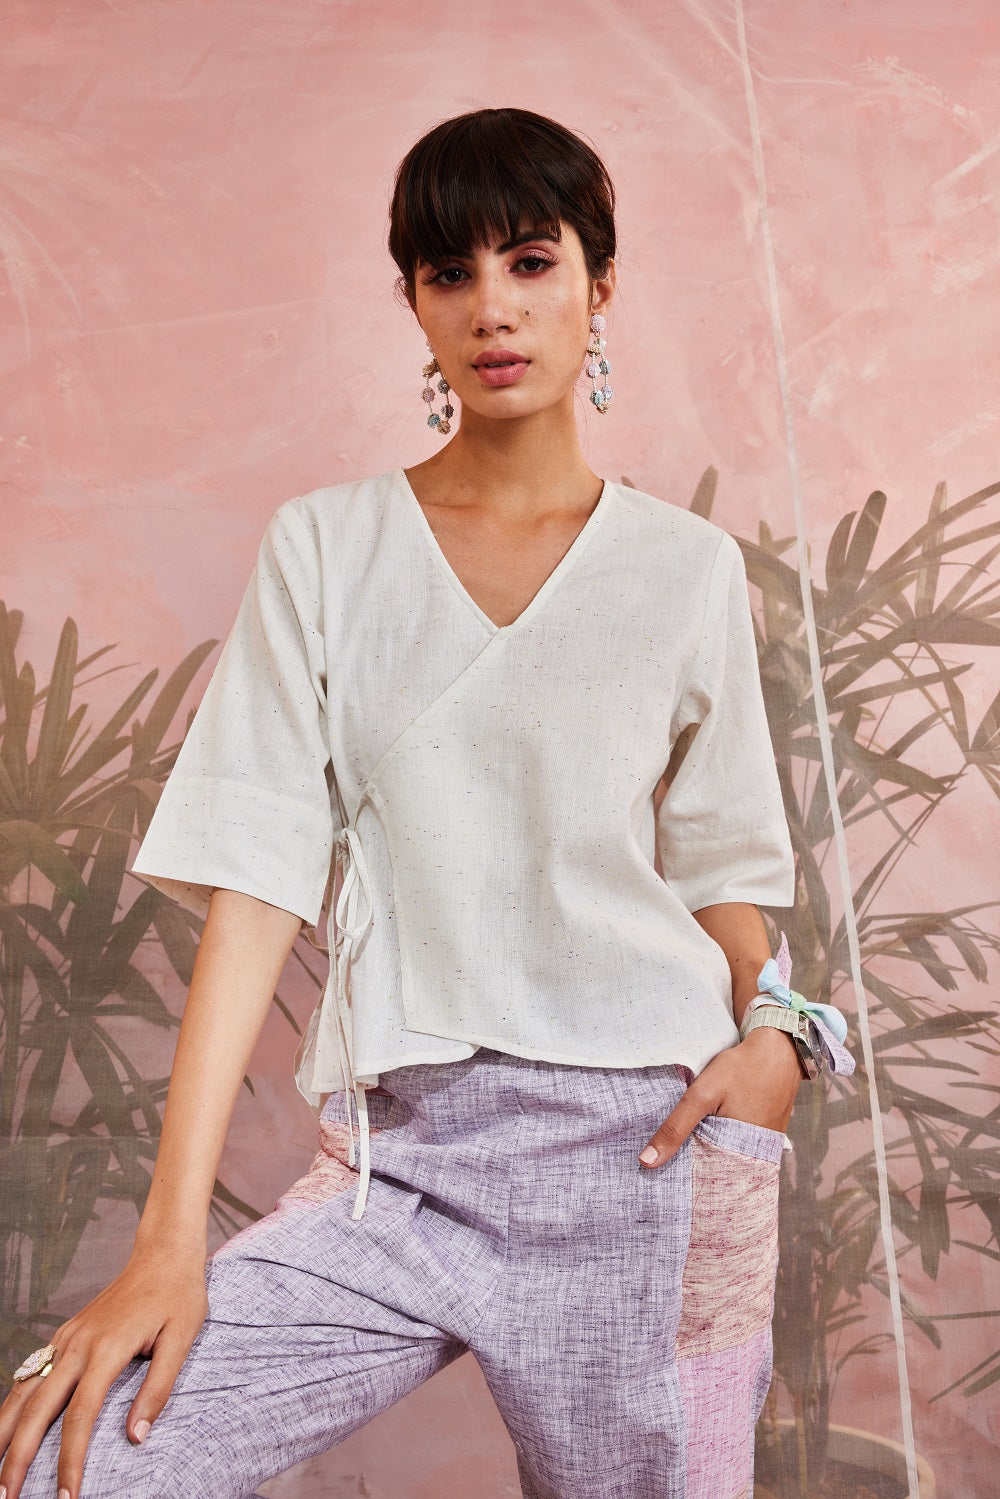 Off-White Short Tie-Up Top at Kamakhyaa by Charkhee. This item is Casual Wear, Cotton, Less than $50, Natural, Regular Fit, Textured, Tops, White, Womenswear, Wrap Tops